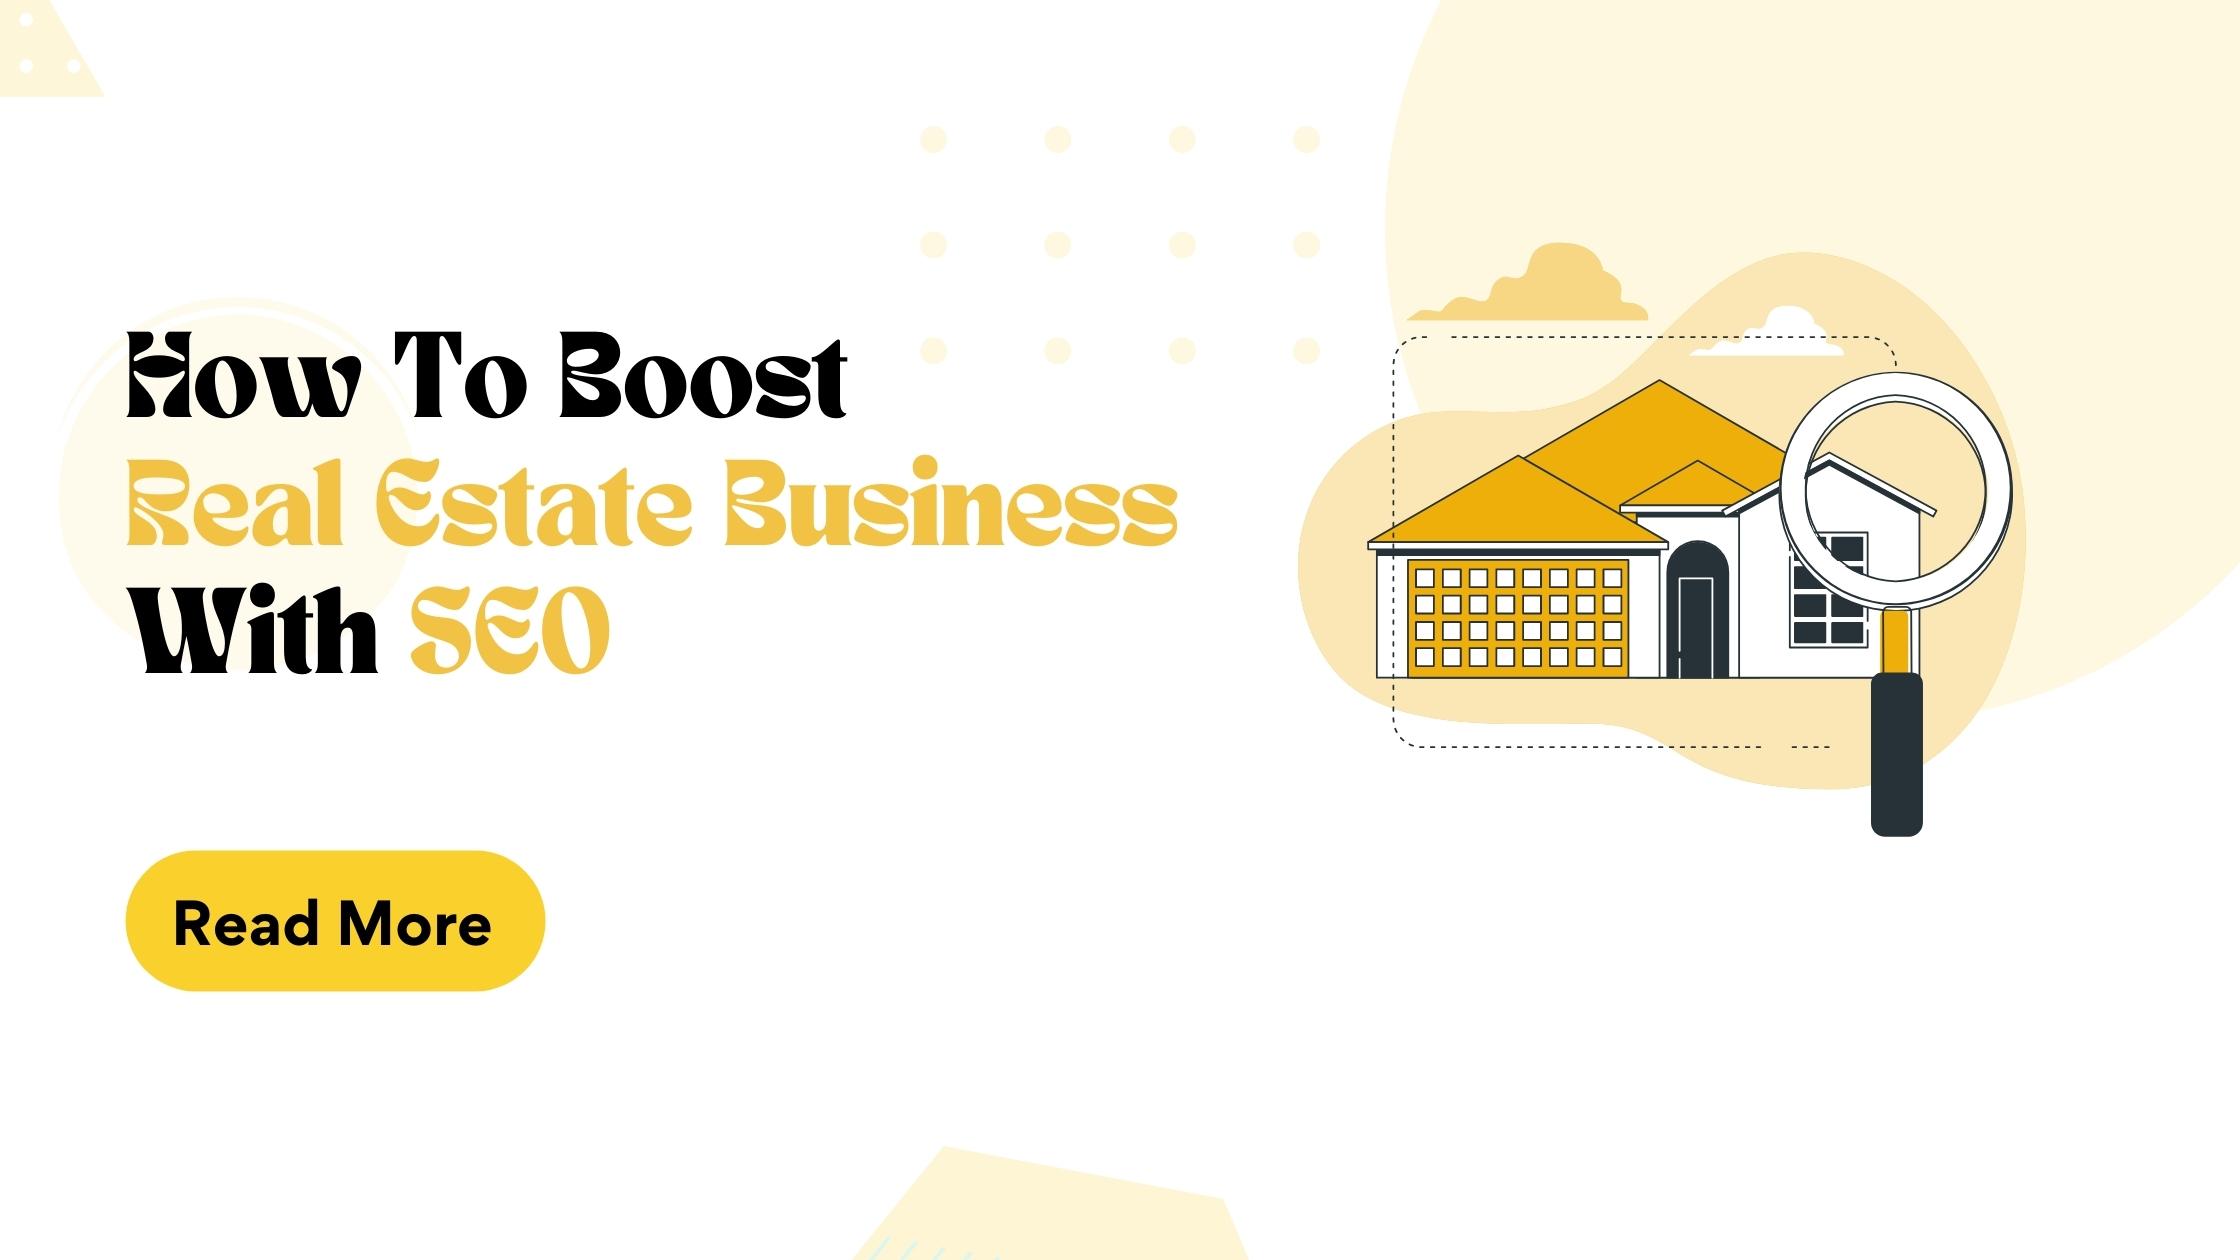 How To Boost Real Estate Business With SEO